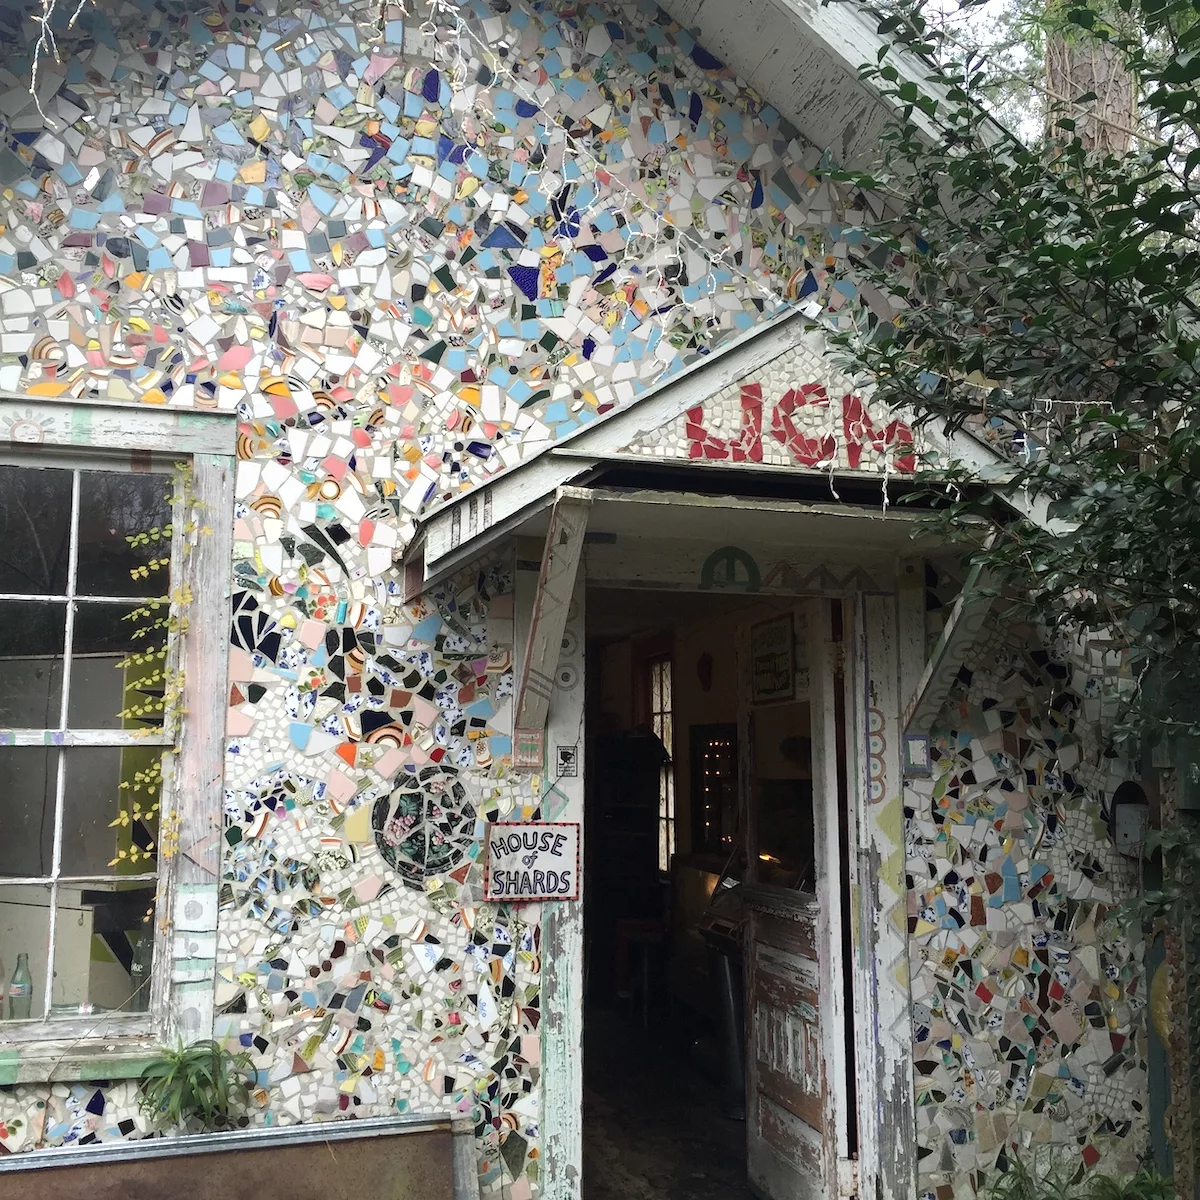 Exterior of the House of Shards at the Abita Mystery House in Abita Springs, Louisiana